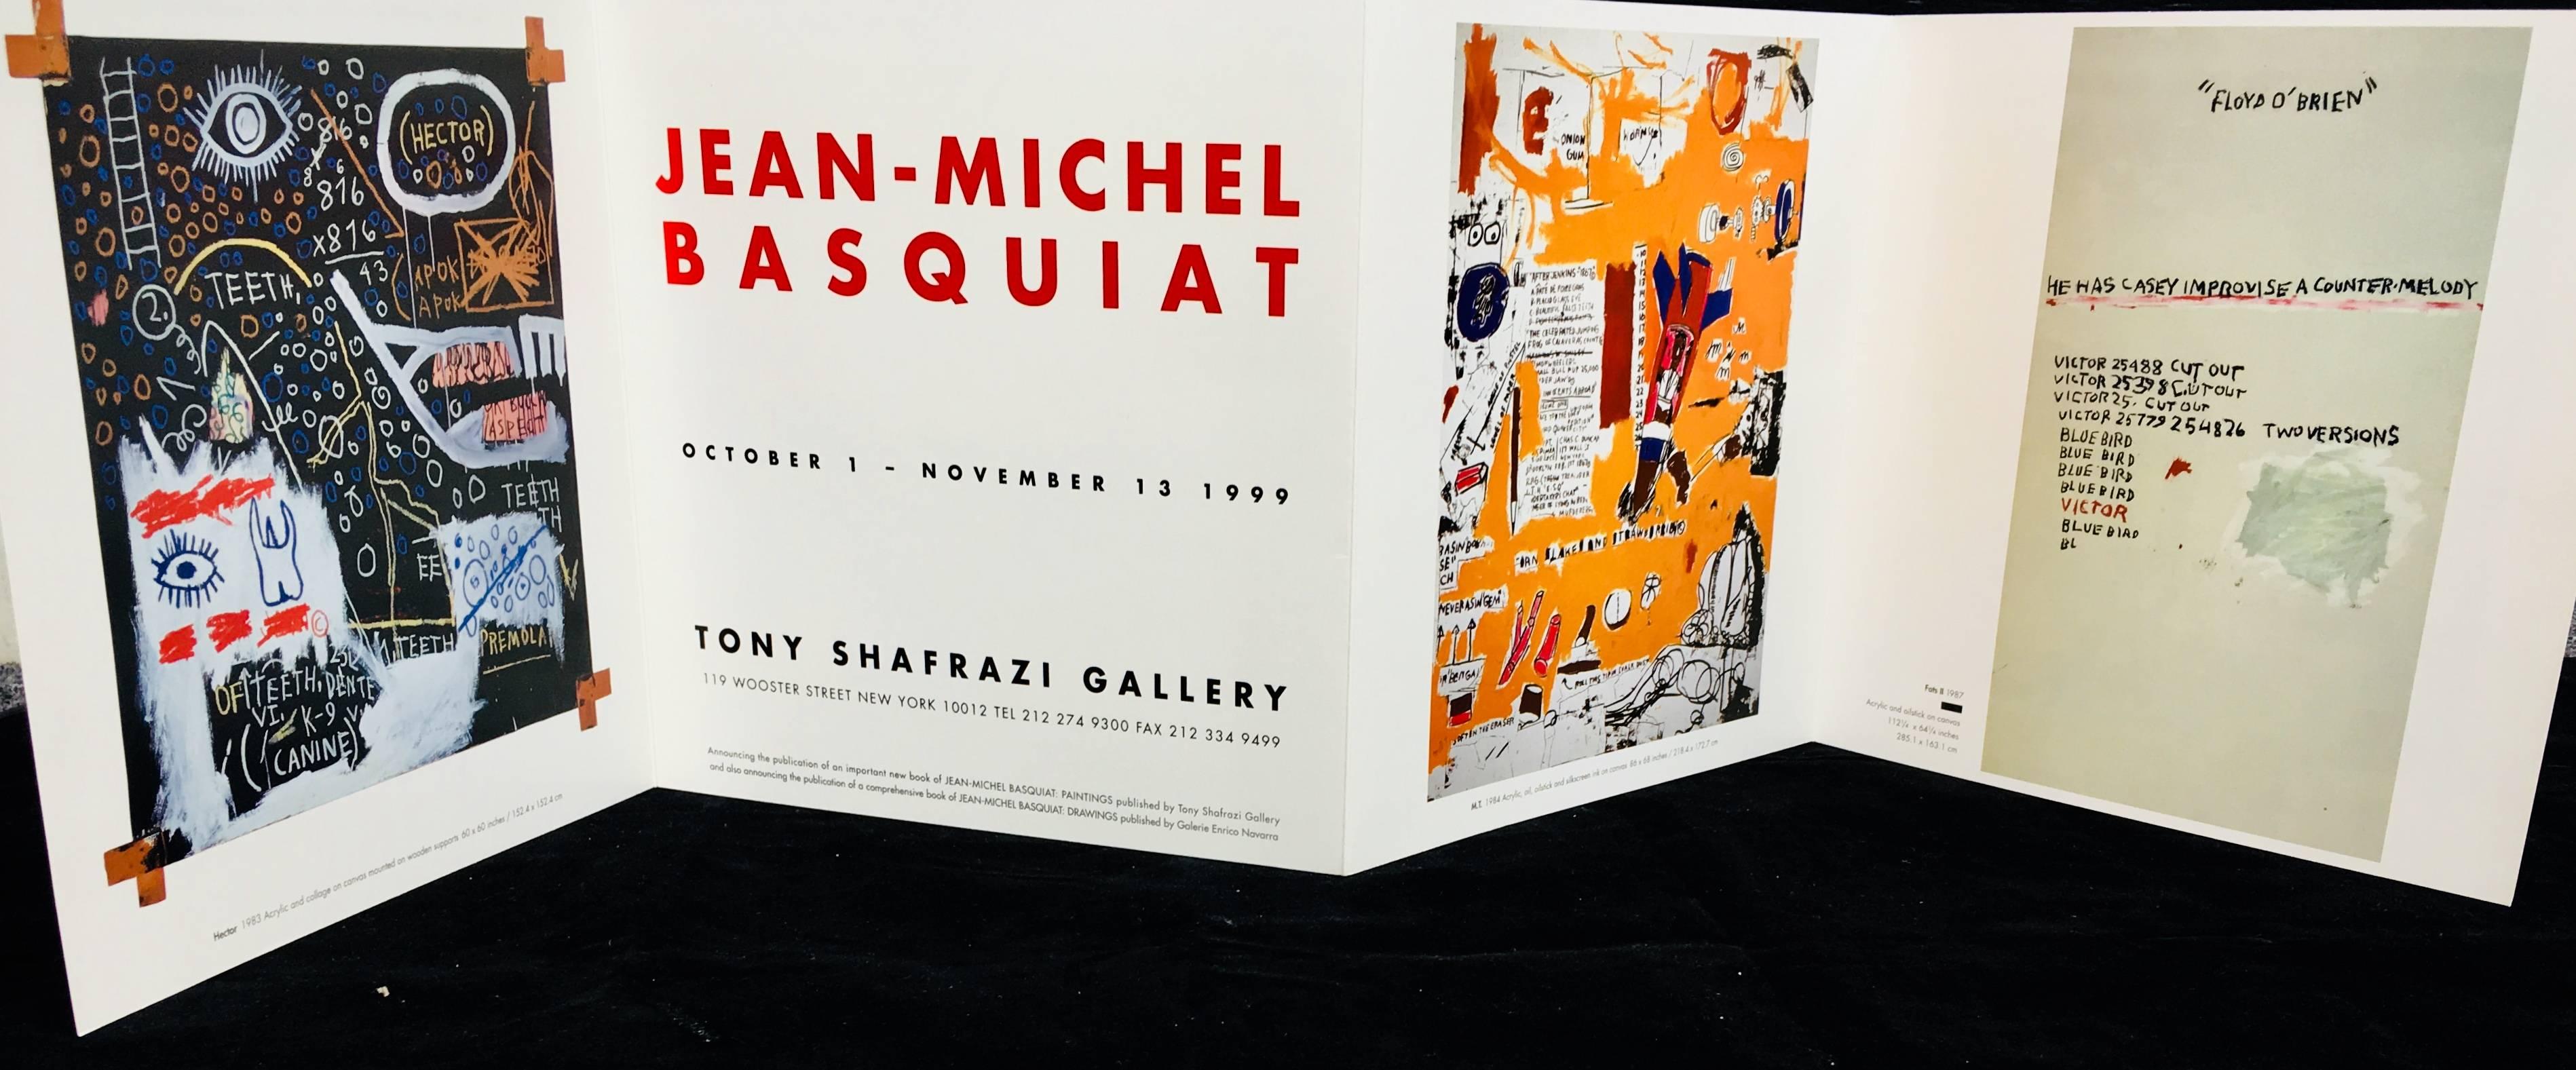 Basquiat Tony Shafrazi poster card 
Vintage announcement produced in conjunction with 'Jean-Michel Basquiat at Tony Shafrazi Gallery, New York: October 1 to November 13, 1999'.  A rare frame-able, Basquiat ephemera piece with much character. 8.5 x